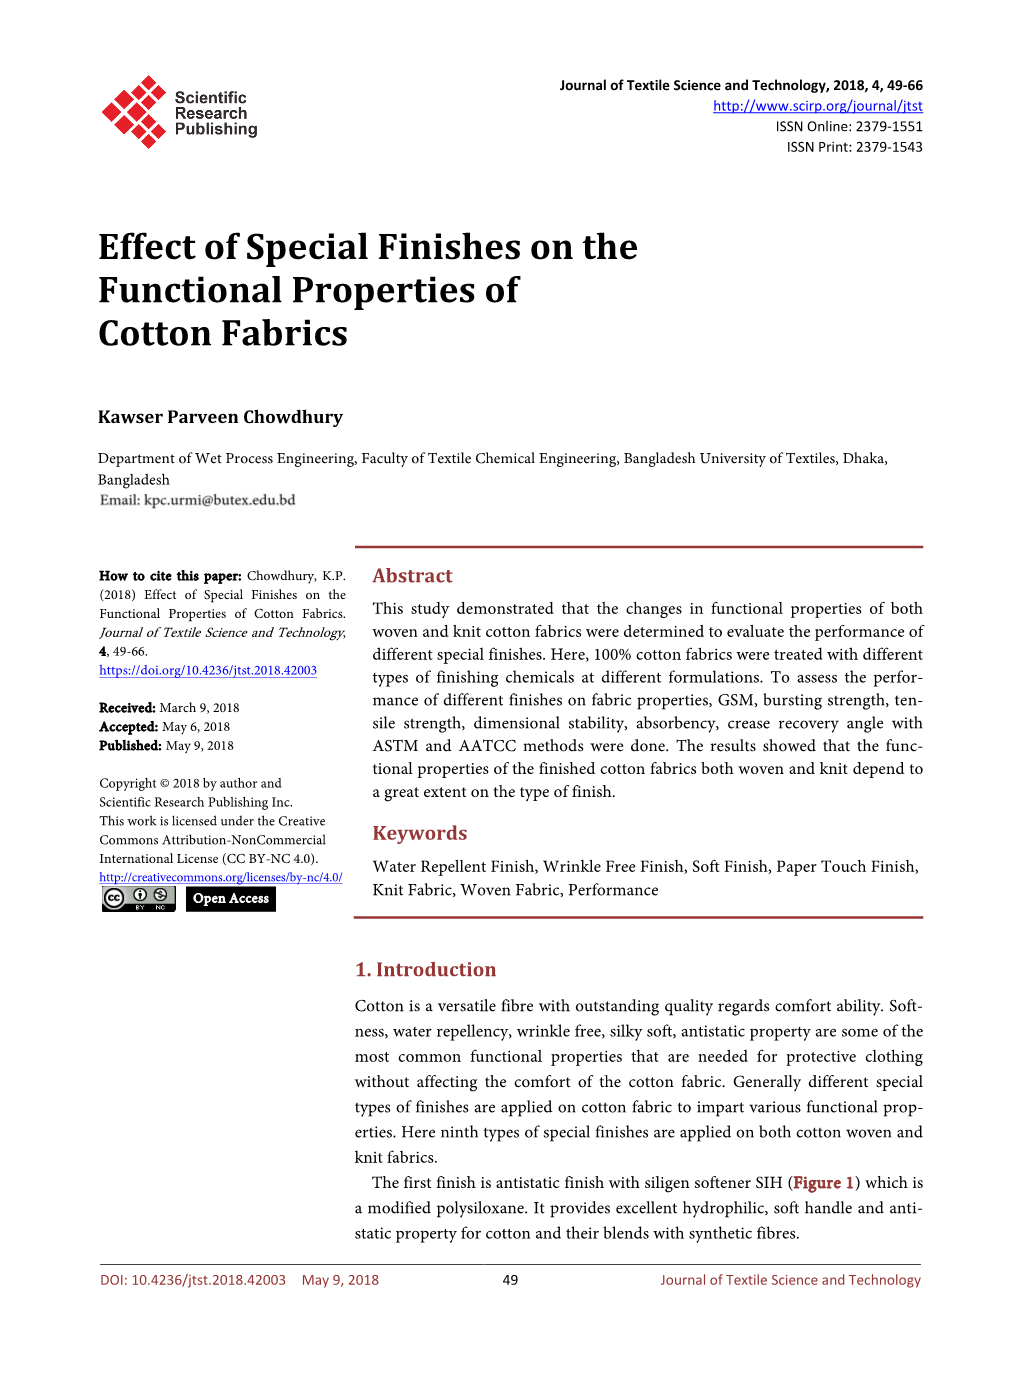 Effect of Special Finishes on the Functional Properties of Cotton Fabrics